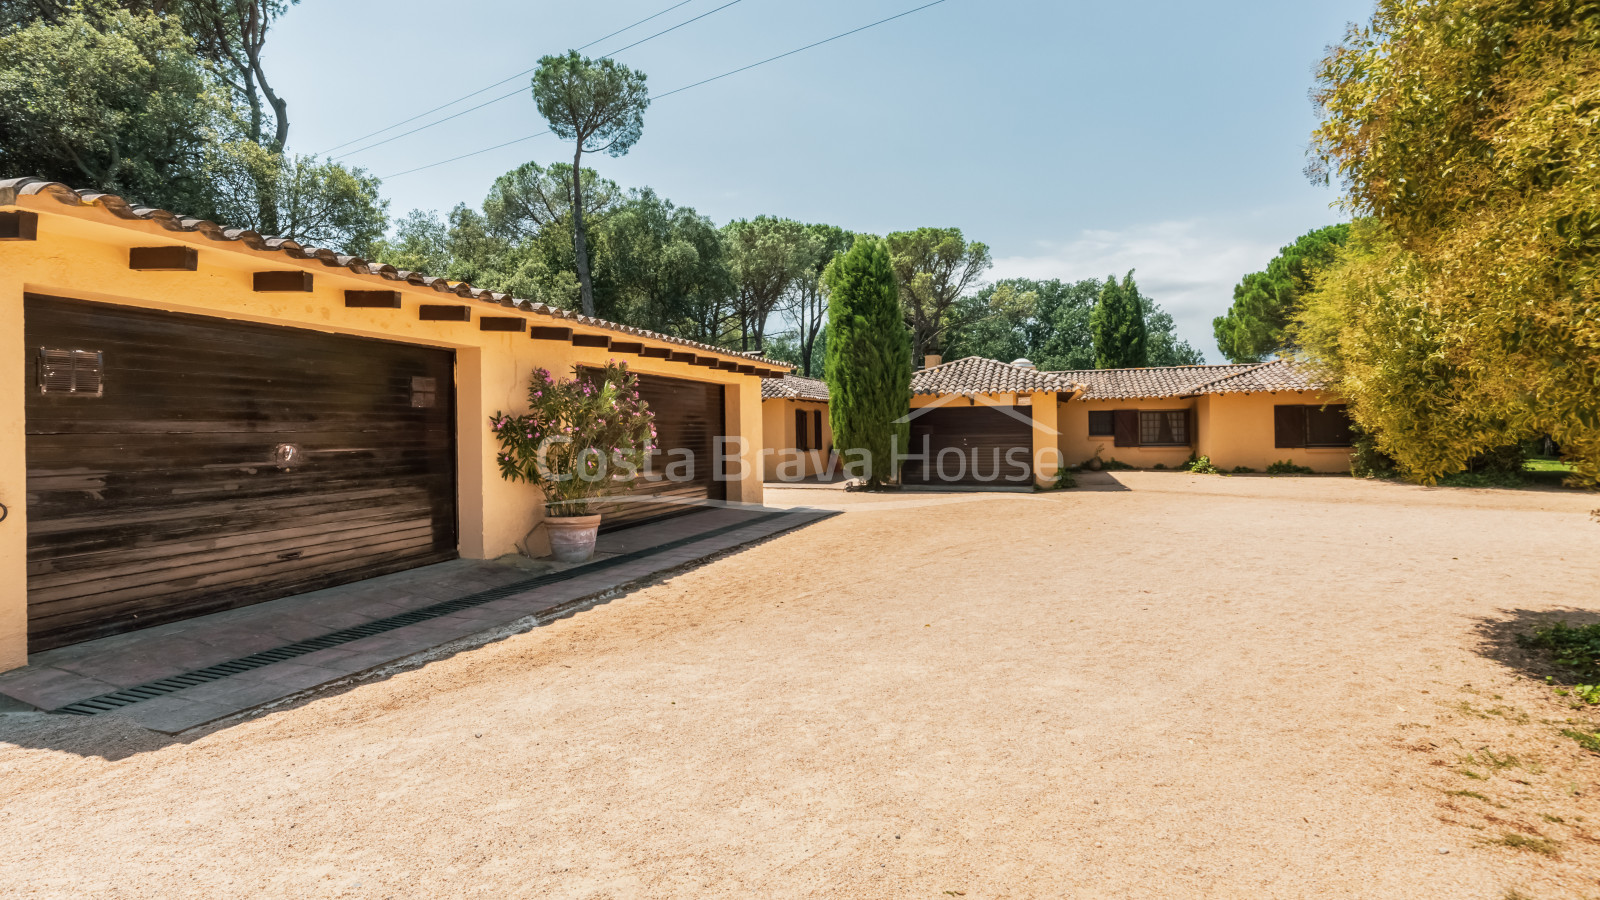 Exclusive property near Begur with large land and horse stables